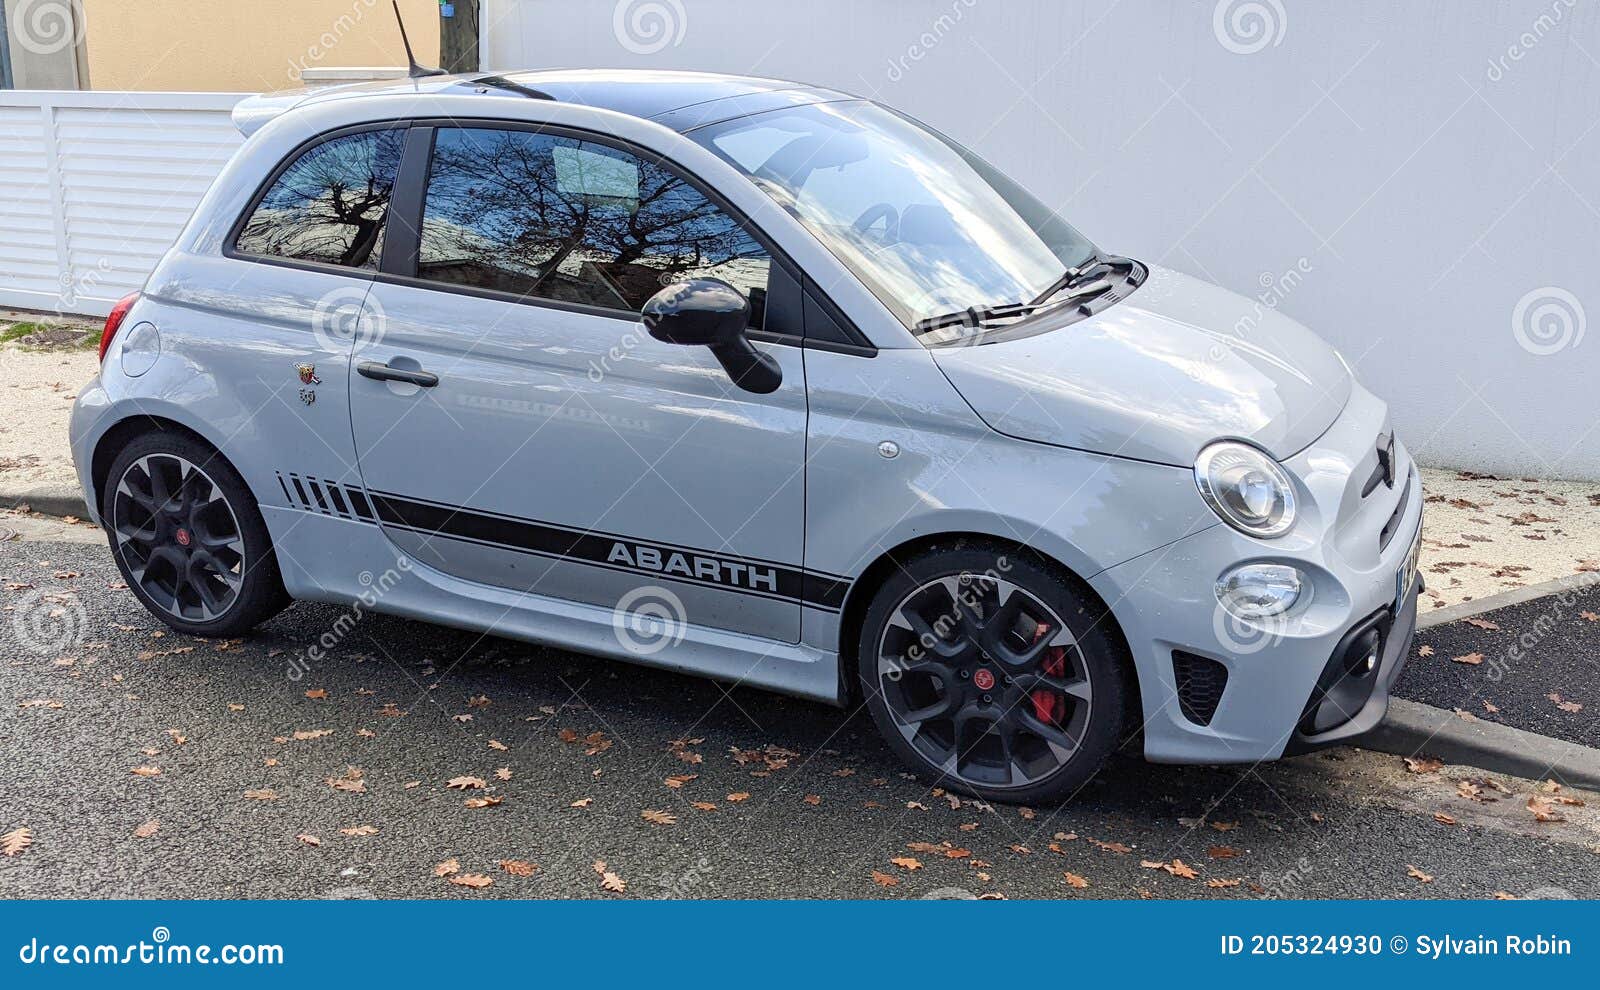 kleuring congestie Kudde Abarth Fiat Car 500 Grey Racing Vehicle Sport Automobile in Street Side  View Editorial Image - Image of drive, motor: 205324930